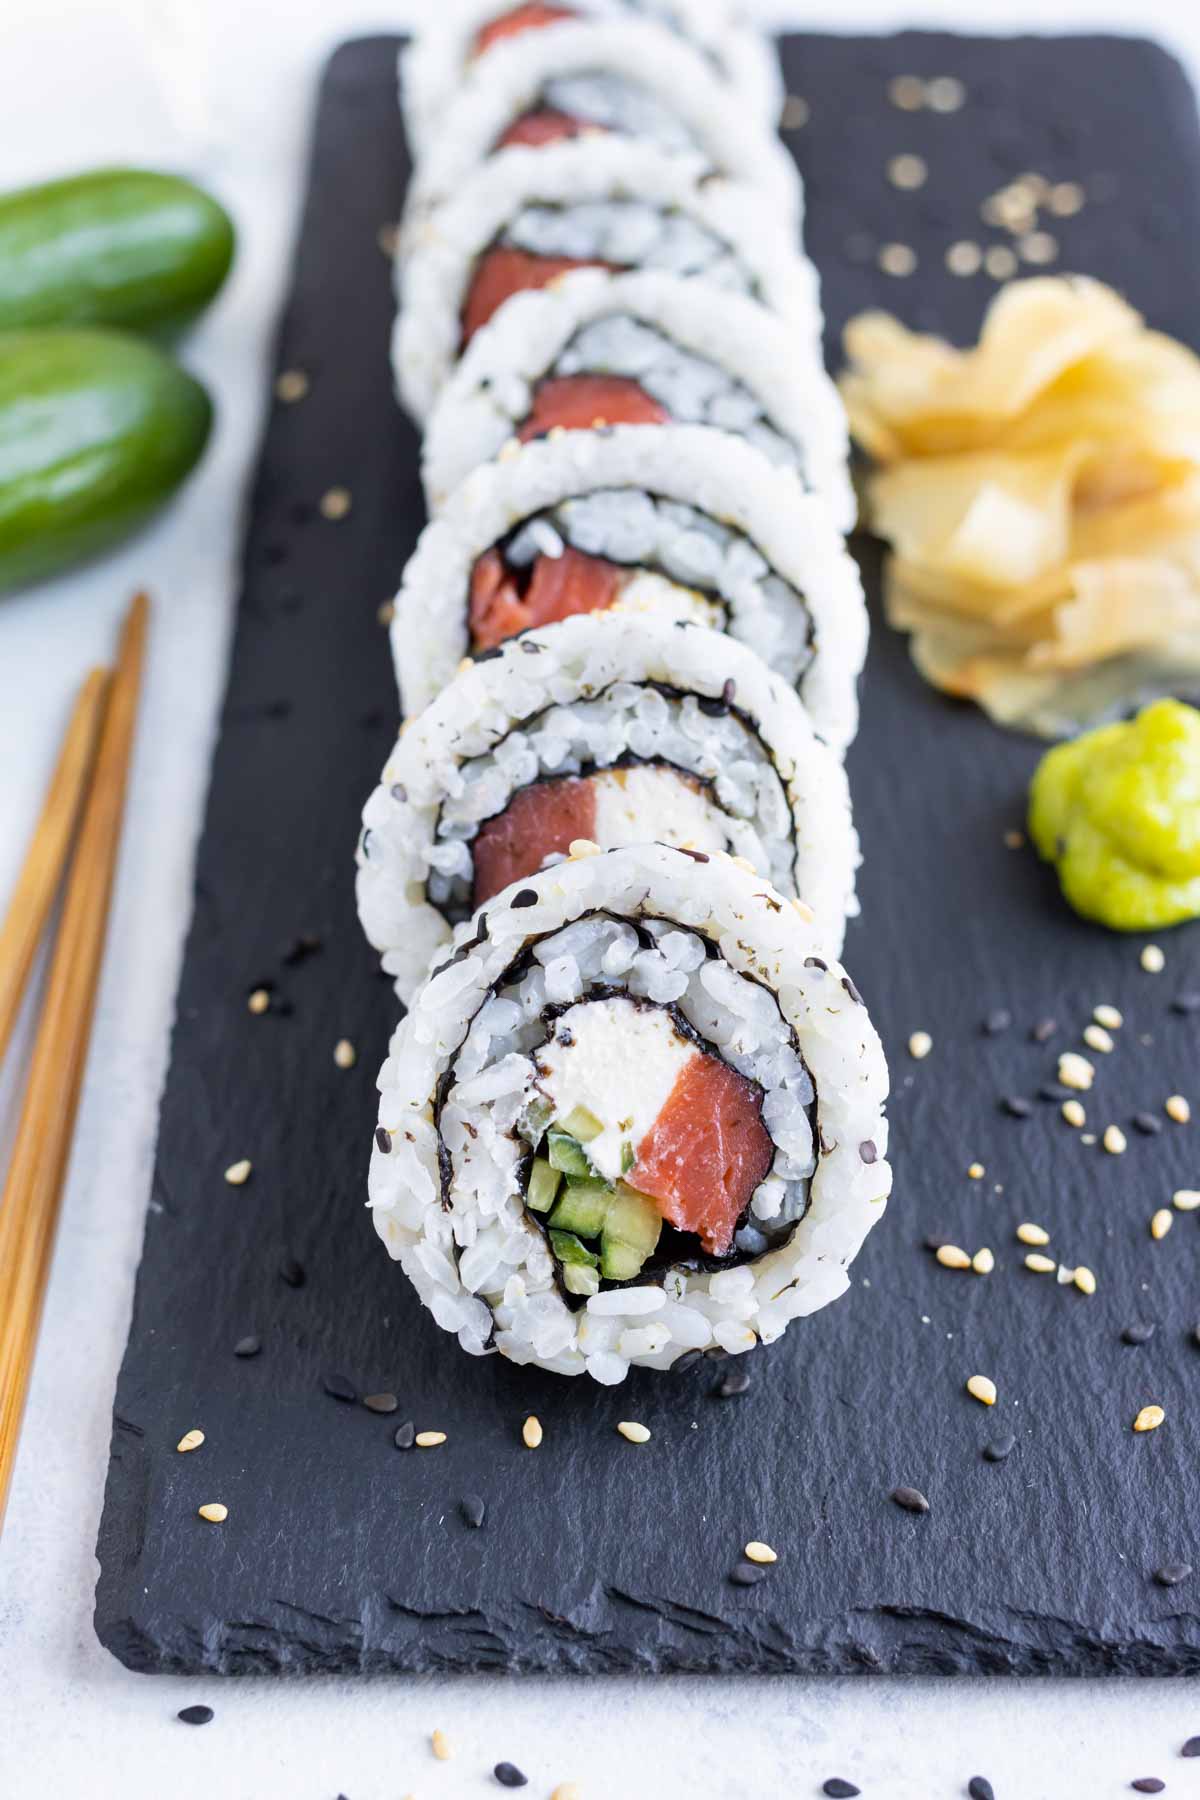 Sushi set featuring sushi, roll, and salmon